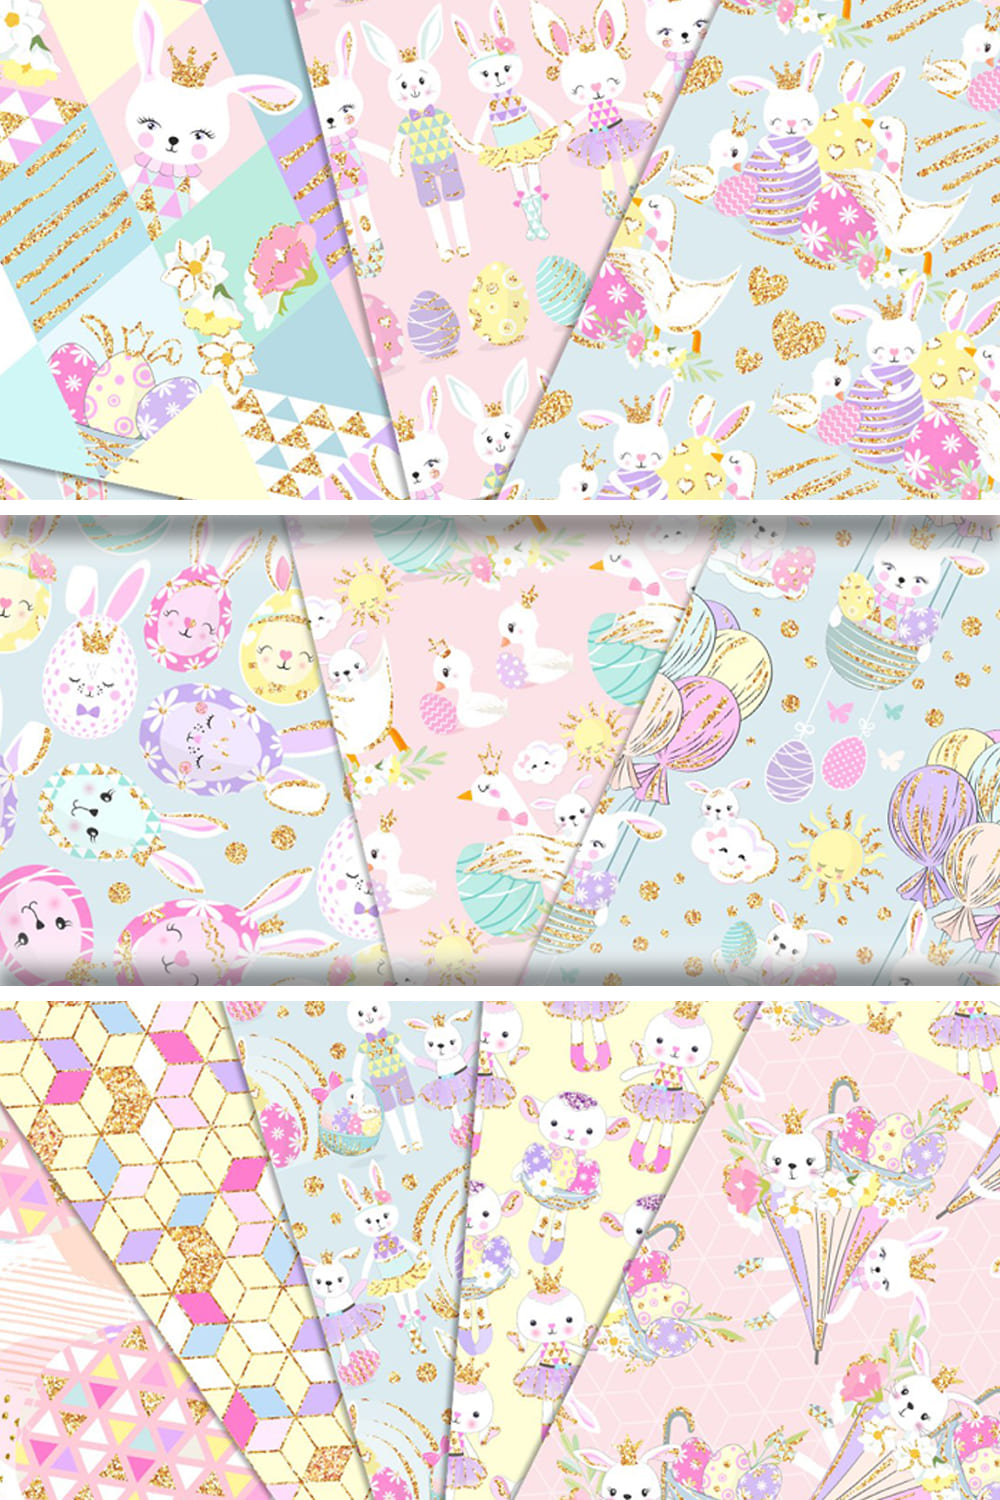 Cute easte collection in pastel colors.